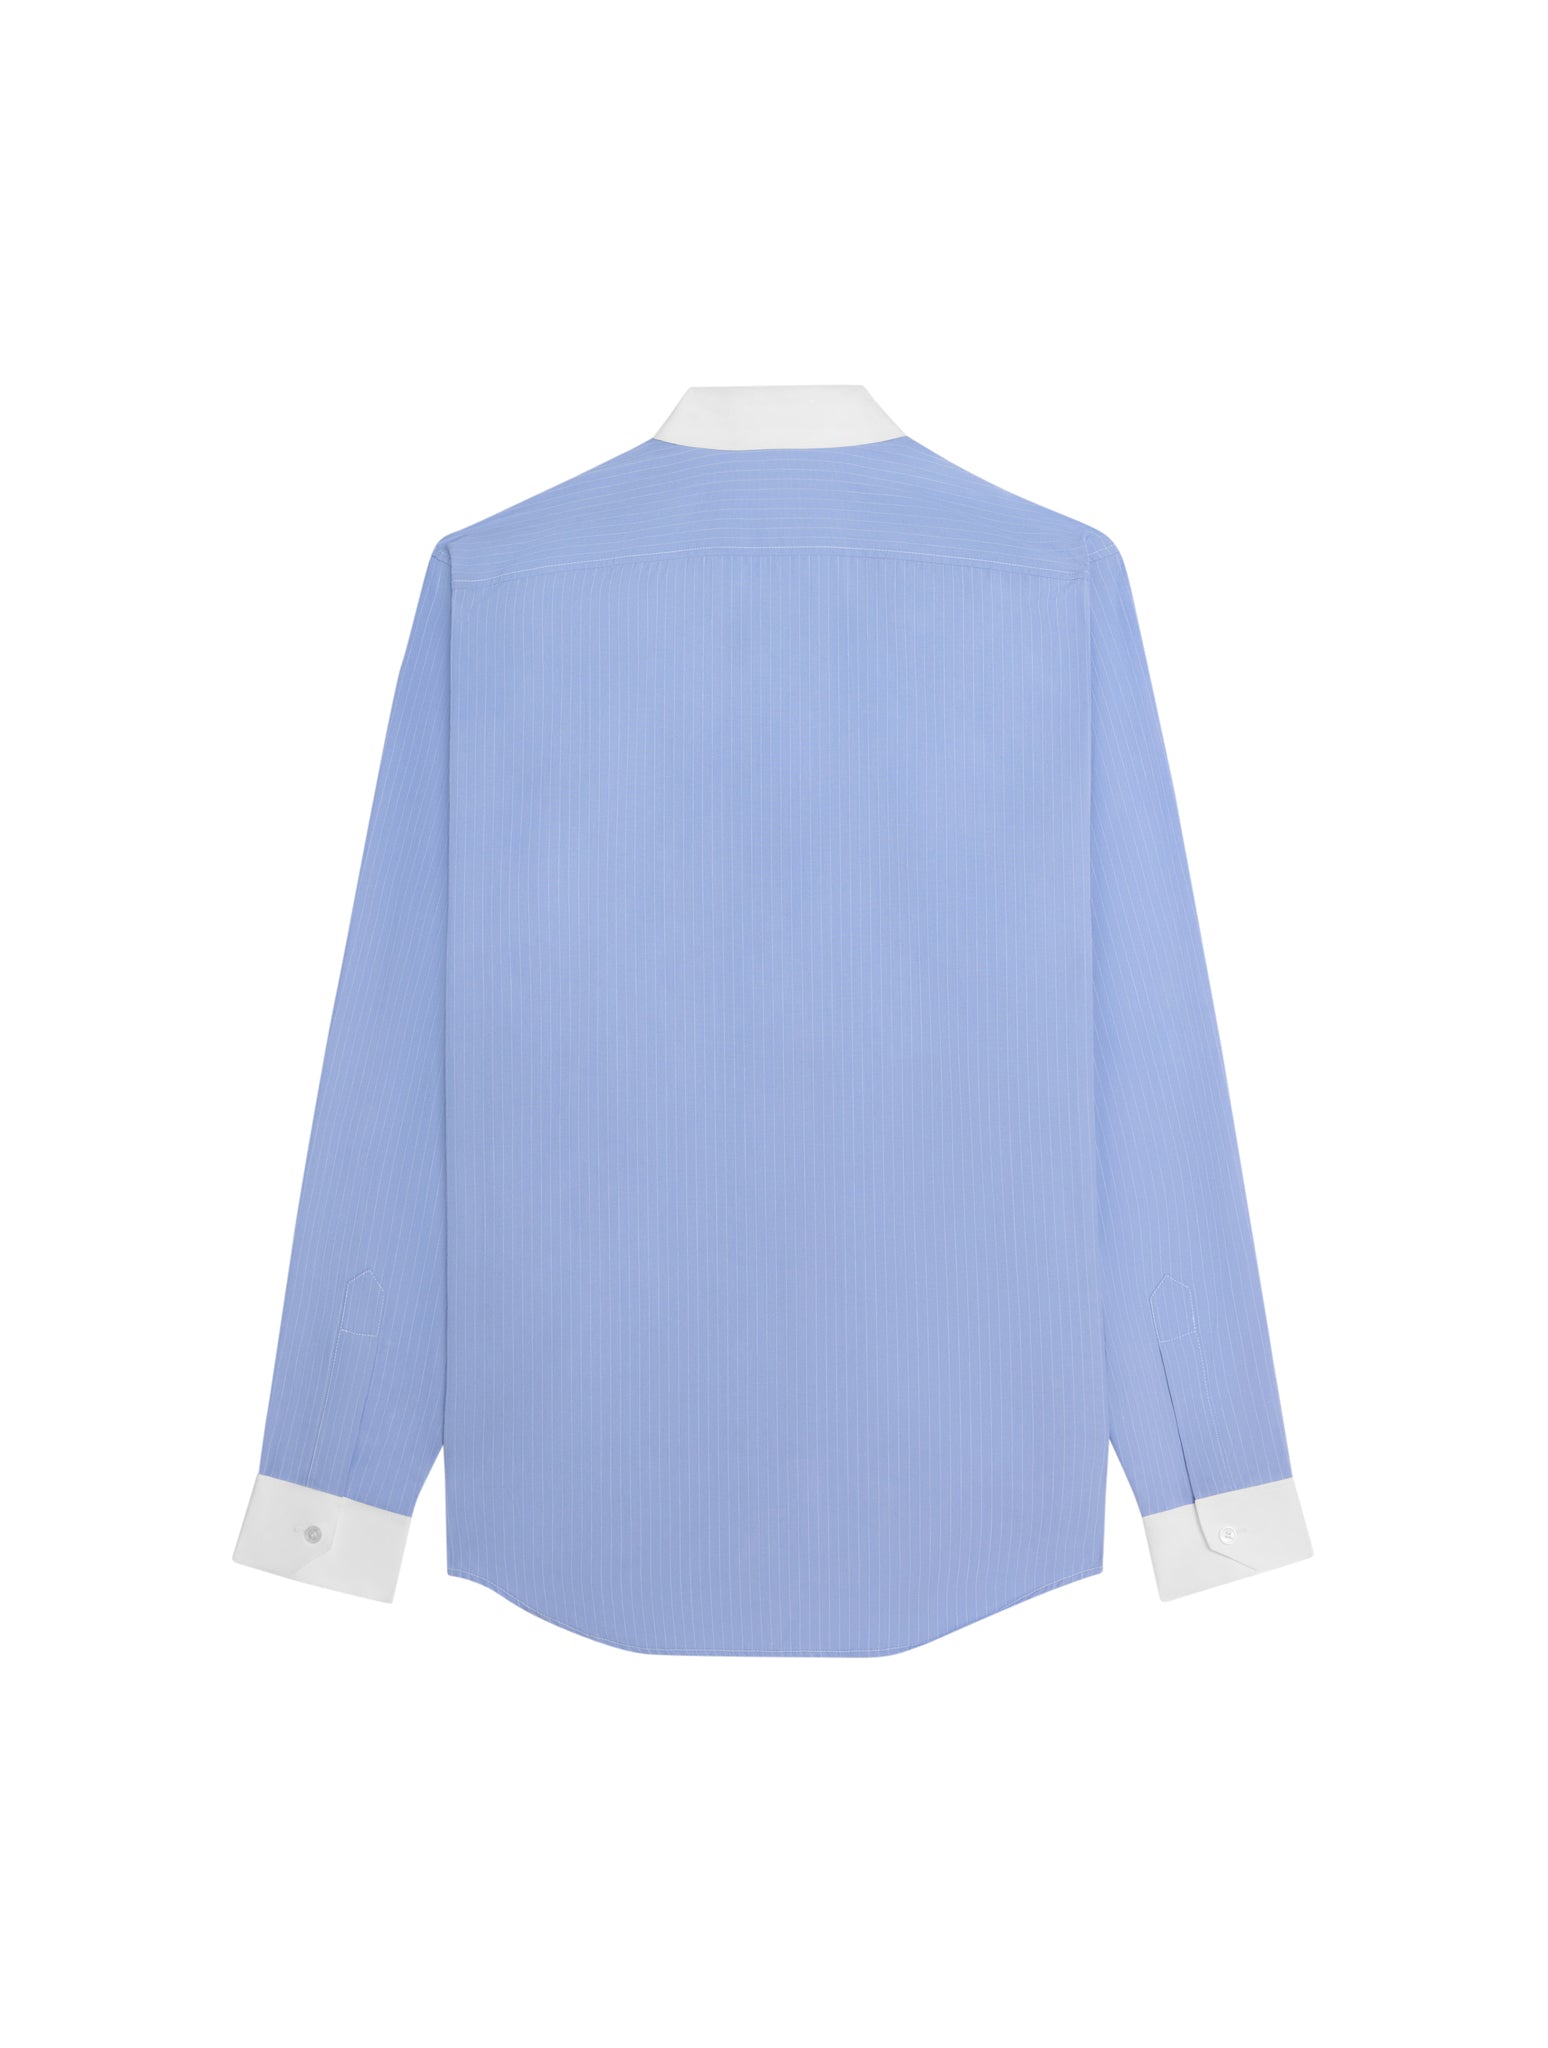 LOOSE SHIRT WITH REVERSE COLLAR IN STRIPED COTTON SKY BLUE / CHALK